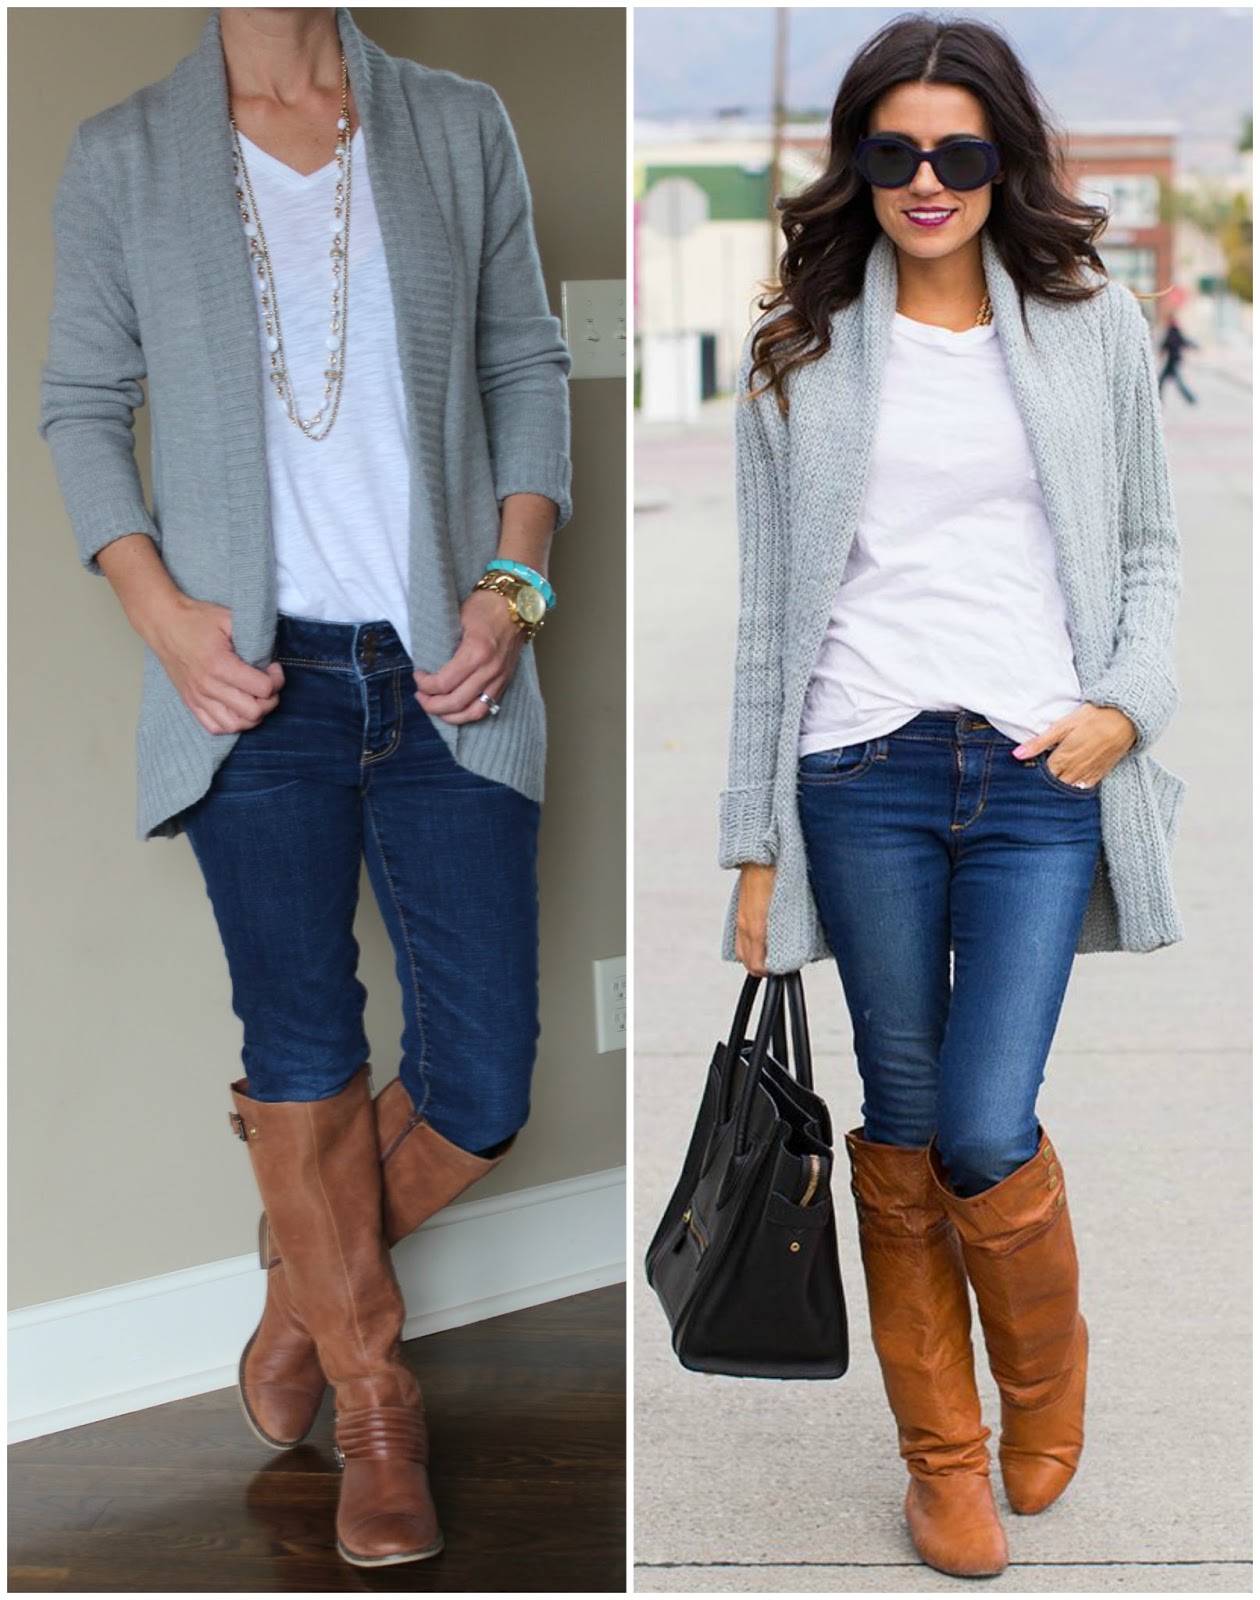 Wear It For Less: WHAT I WORE: GRAY CARDIGAN